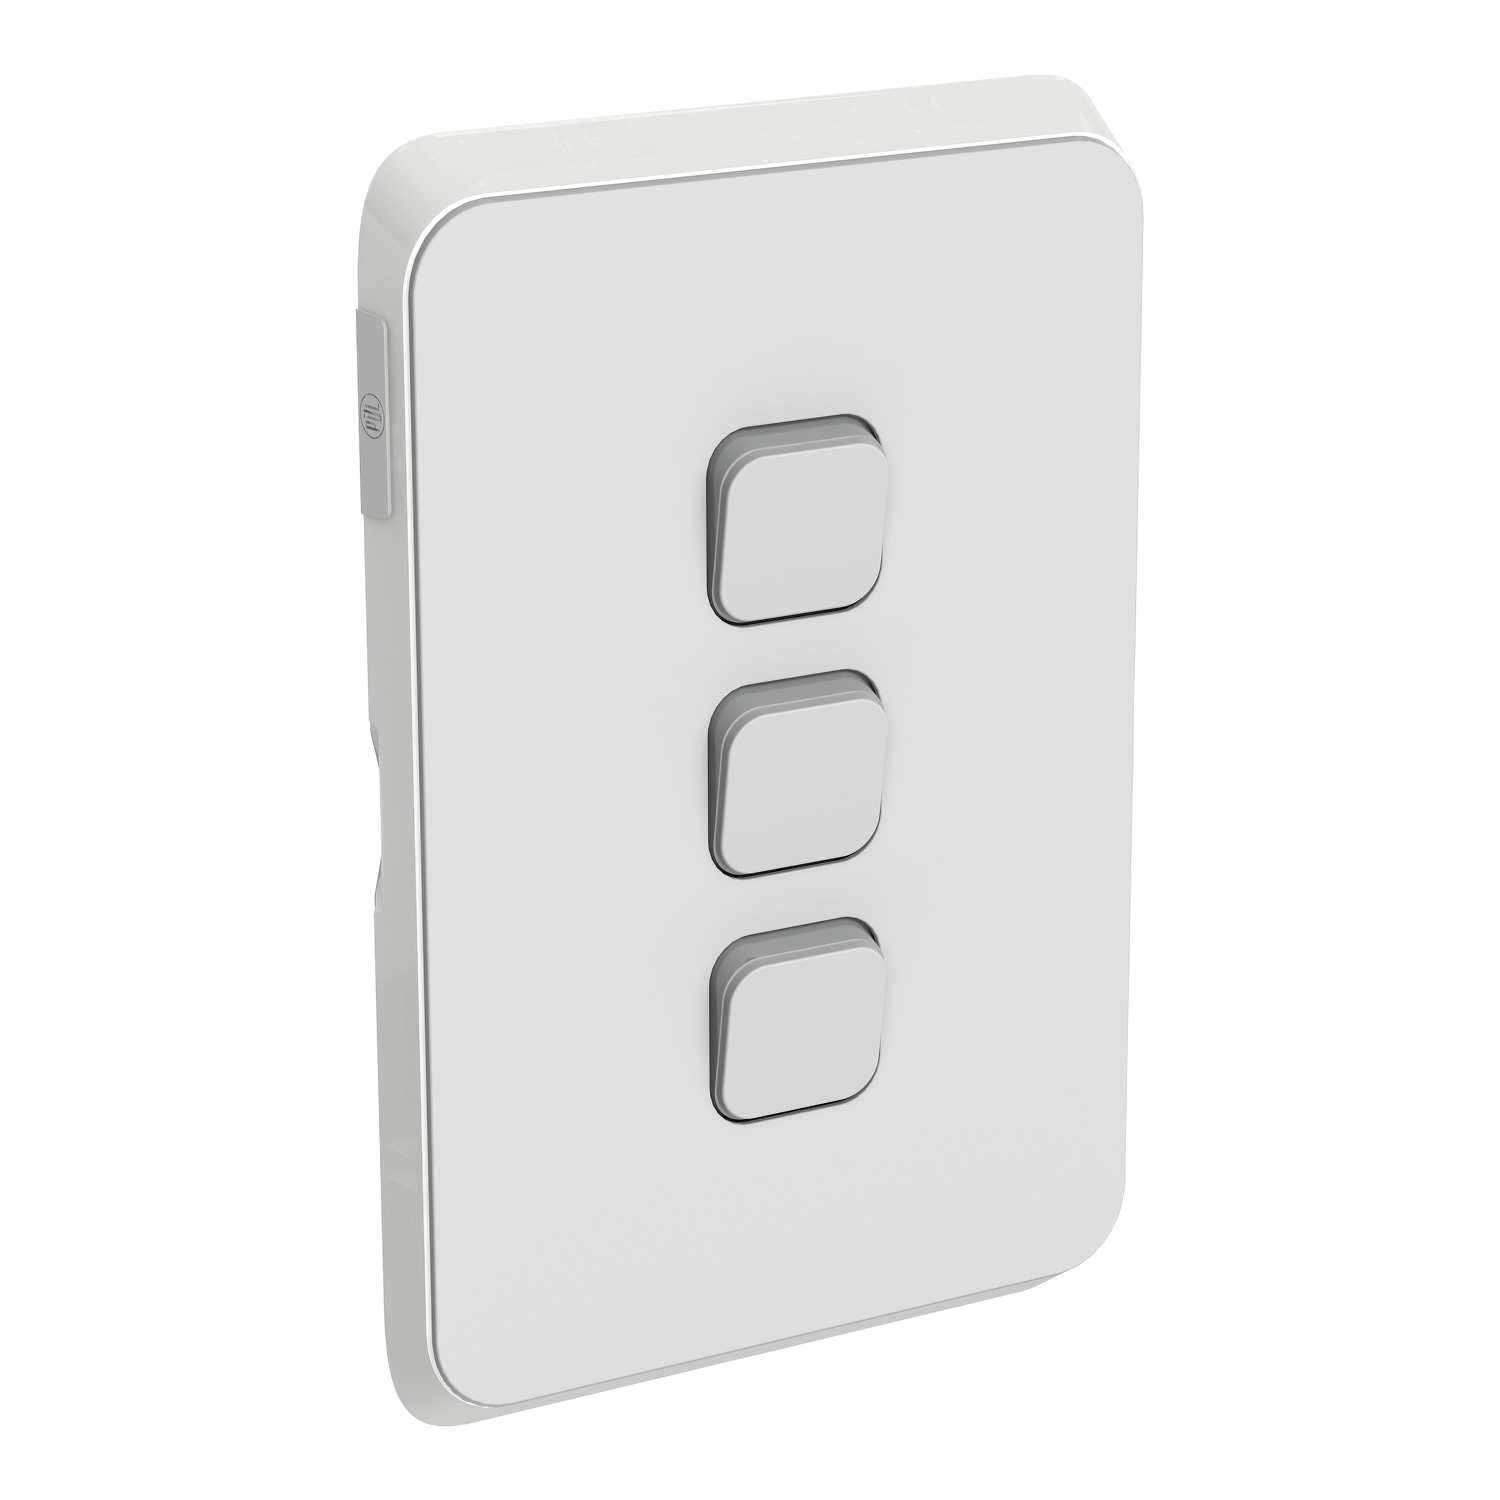 PDL Iconic - Cover Plate Switch 3-Gang - Cool Grey